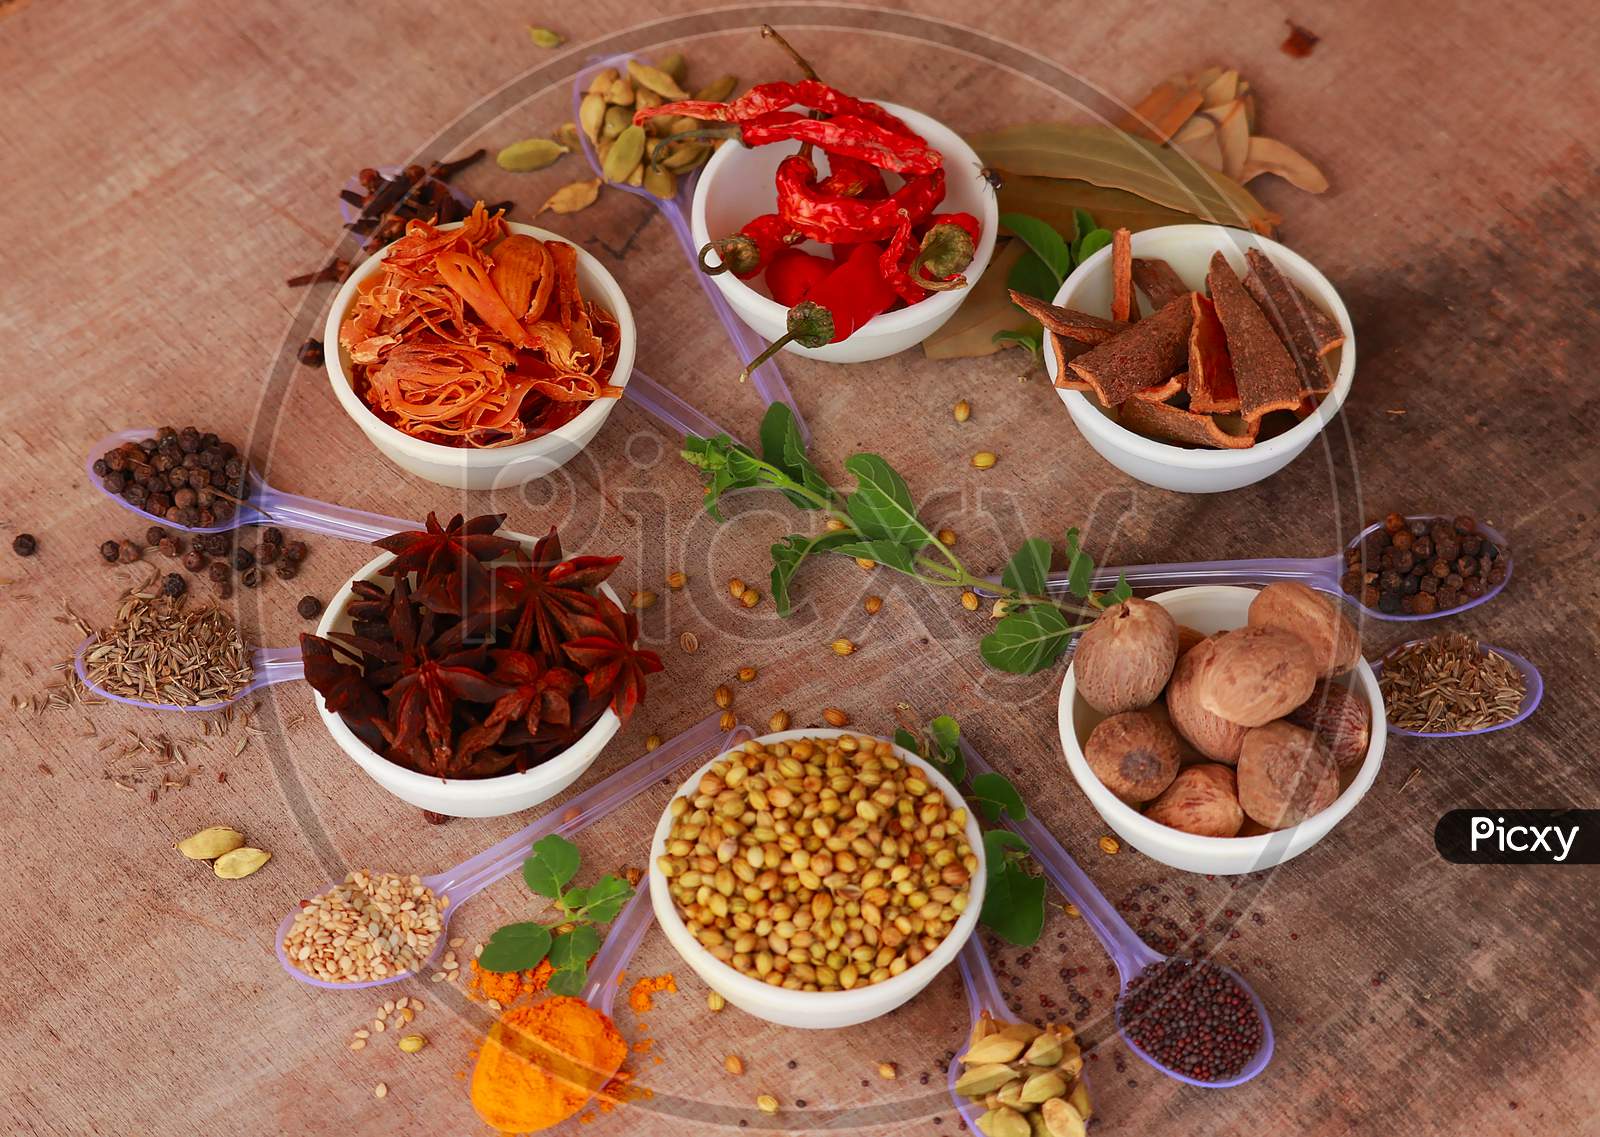 Collection Of Beautiful Indian Spices Rotated On Wooden Table,Assortment Spices And Herbs For Cooking,Food And Cuisine Ingredients,Various Spices Collection,